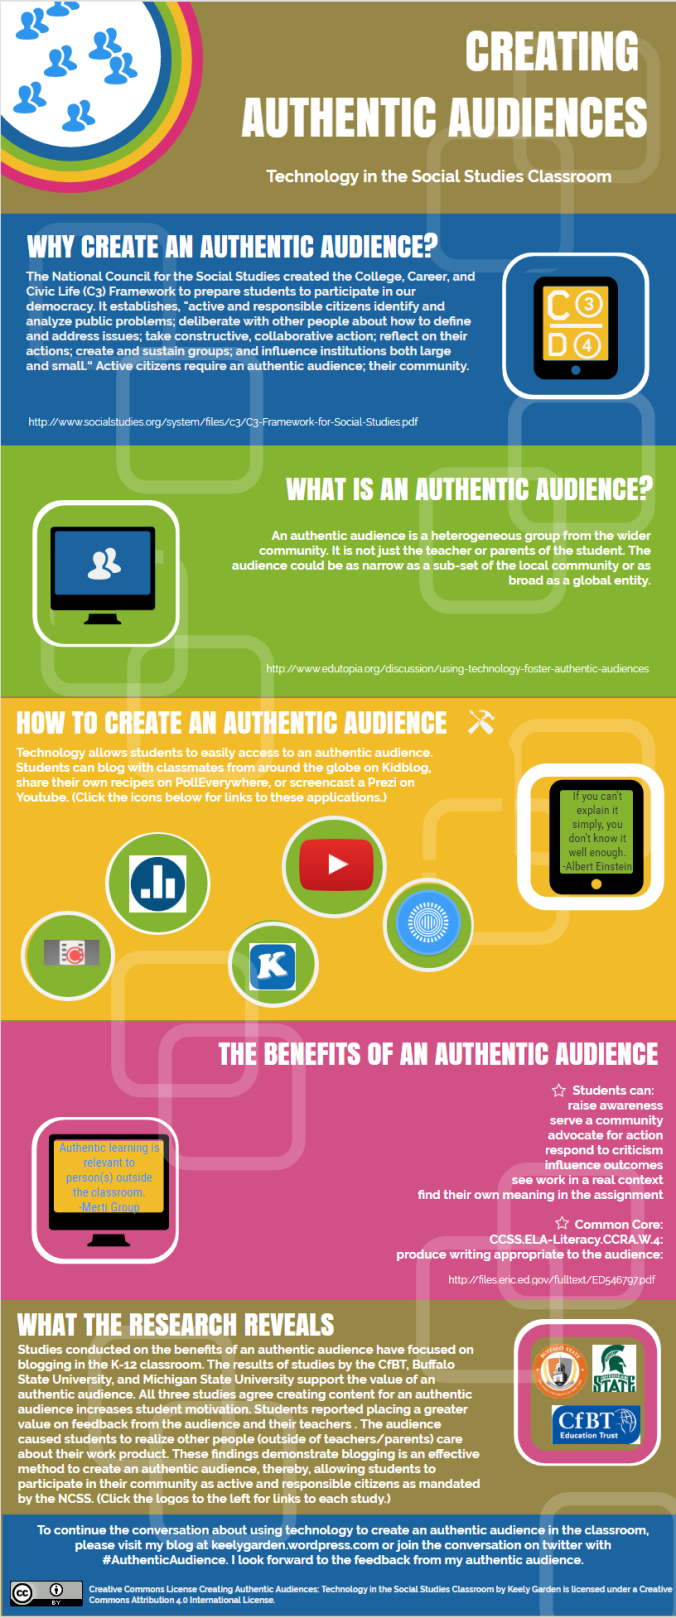 Creating Authentic Audiences  Technology in the Social Studies Classroom   Venngage   Free Infographic Maker